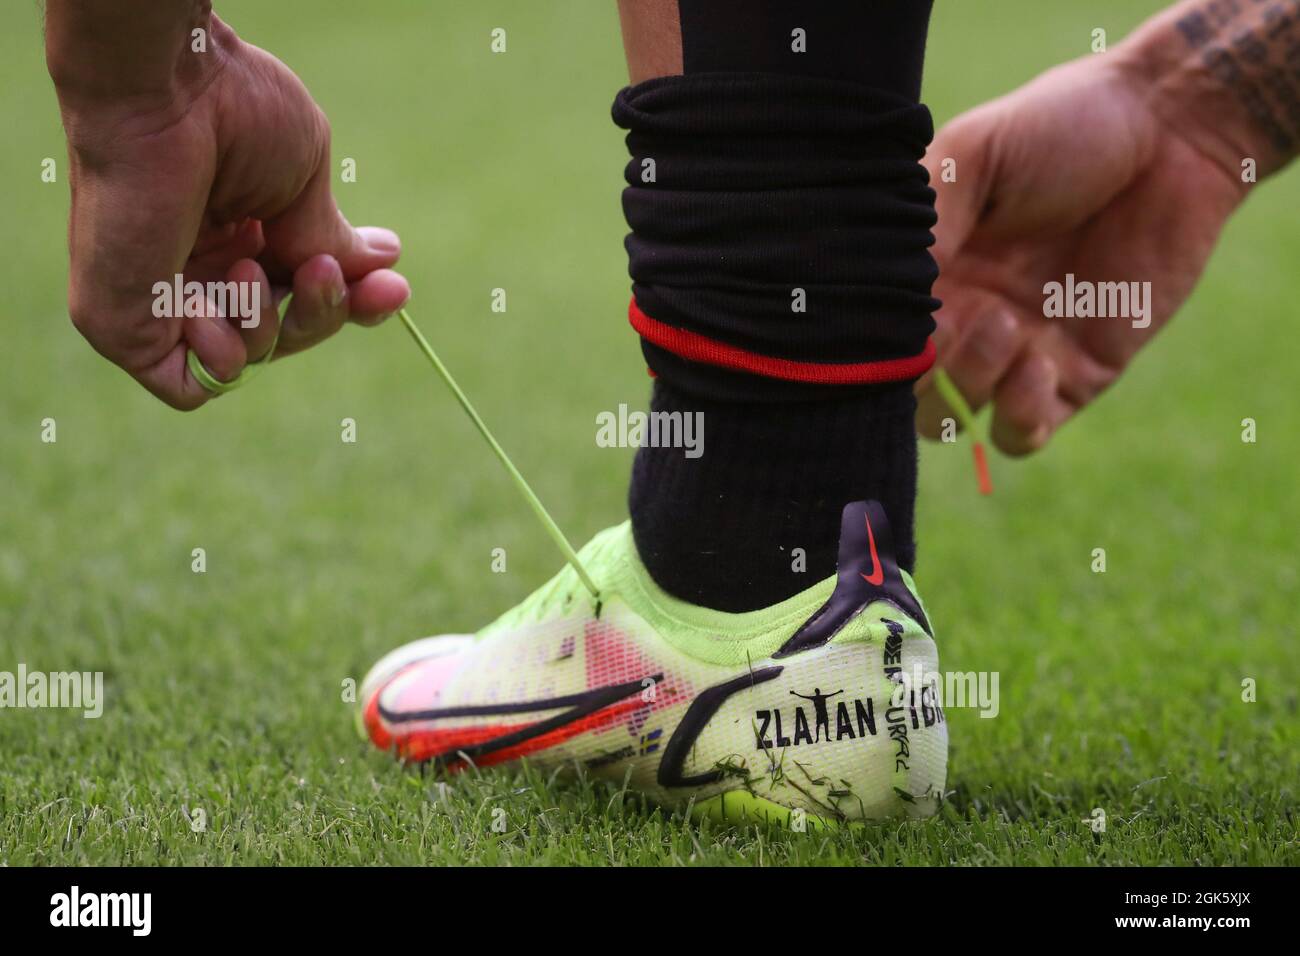 Milan, 12th September 2021. Zlatan Ibrahimovic of AC Milan laces his Nike Mercurial football boots during the warm up prior to the Serie A match at Meazza, Milan. Picture